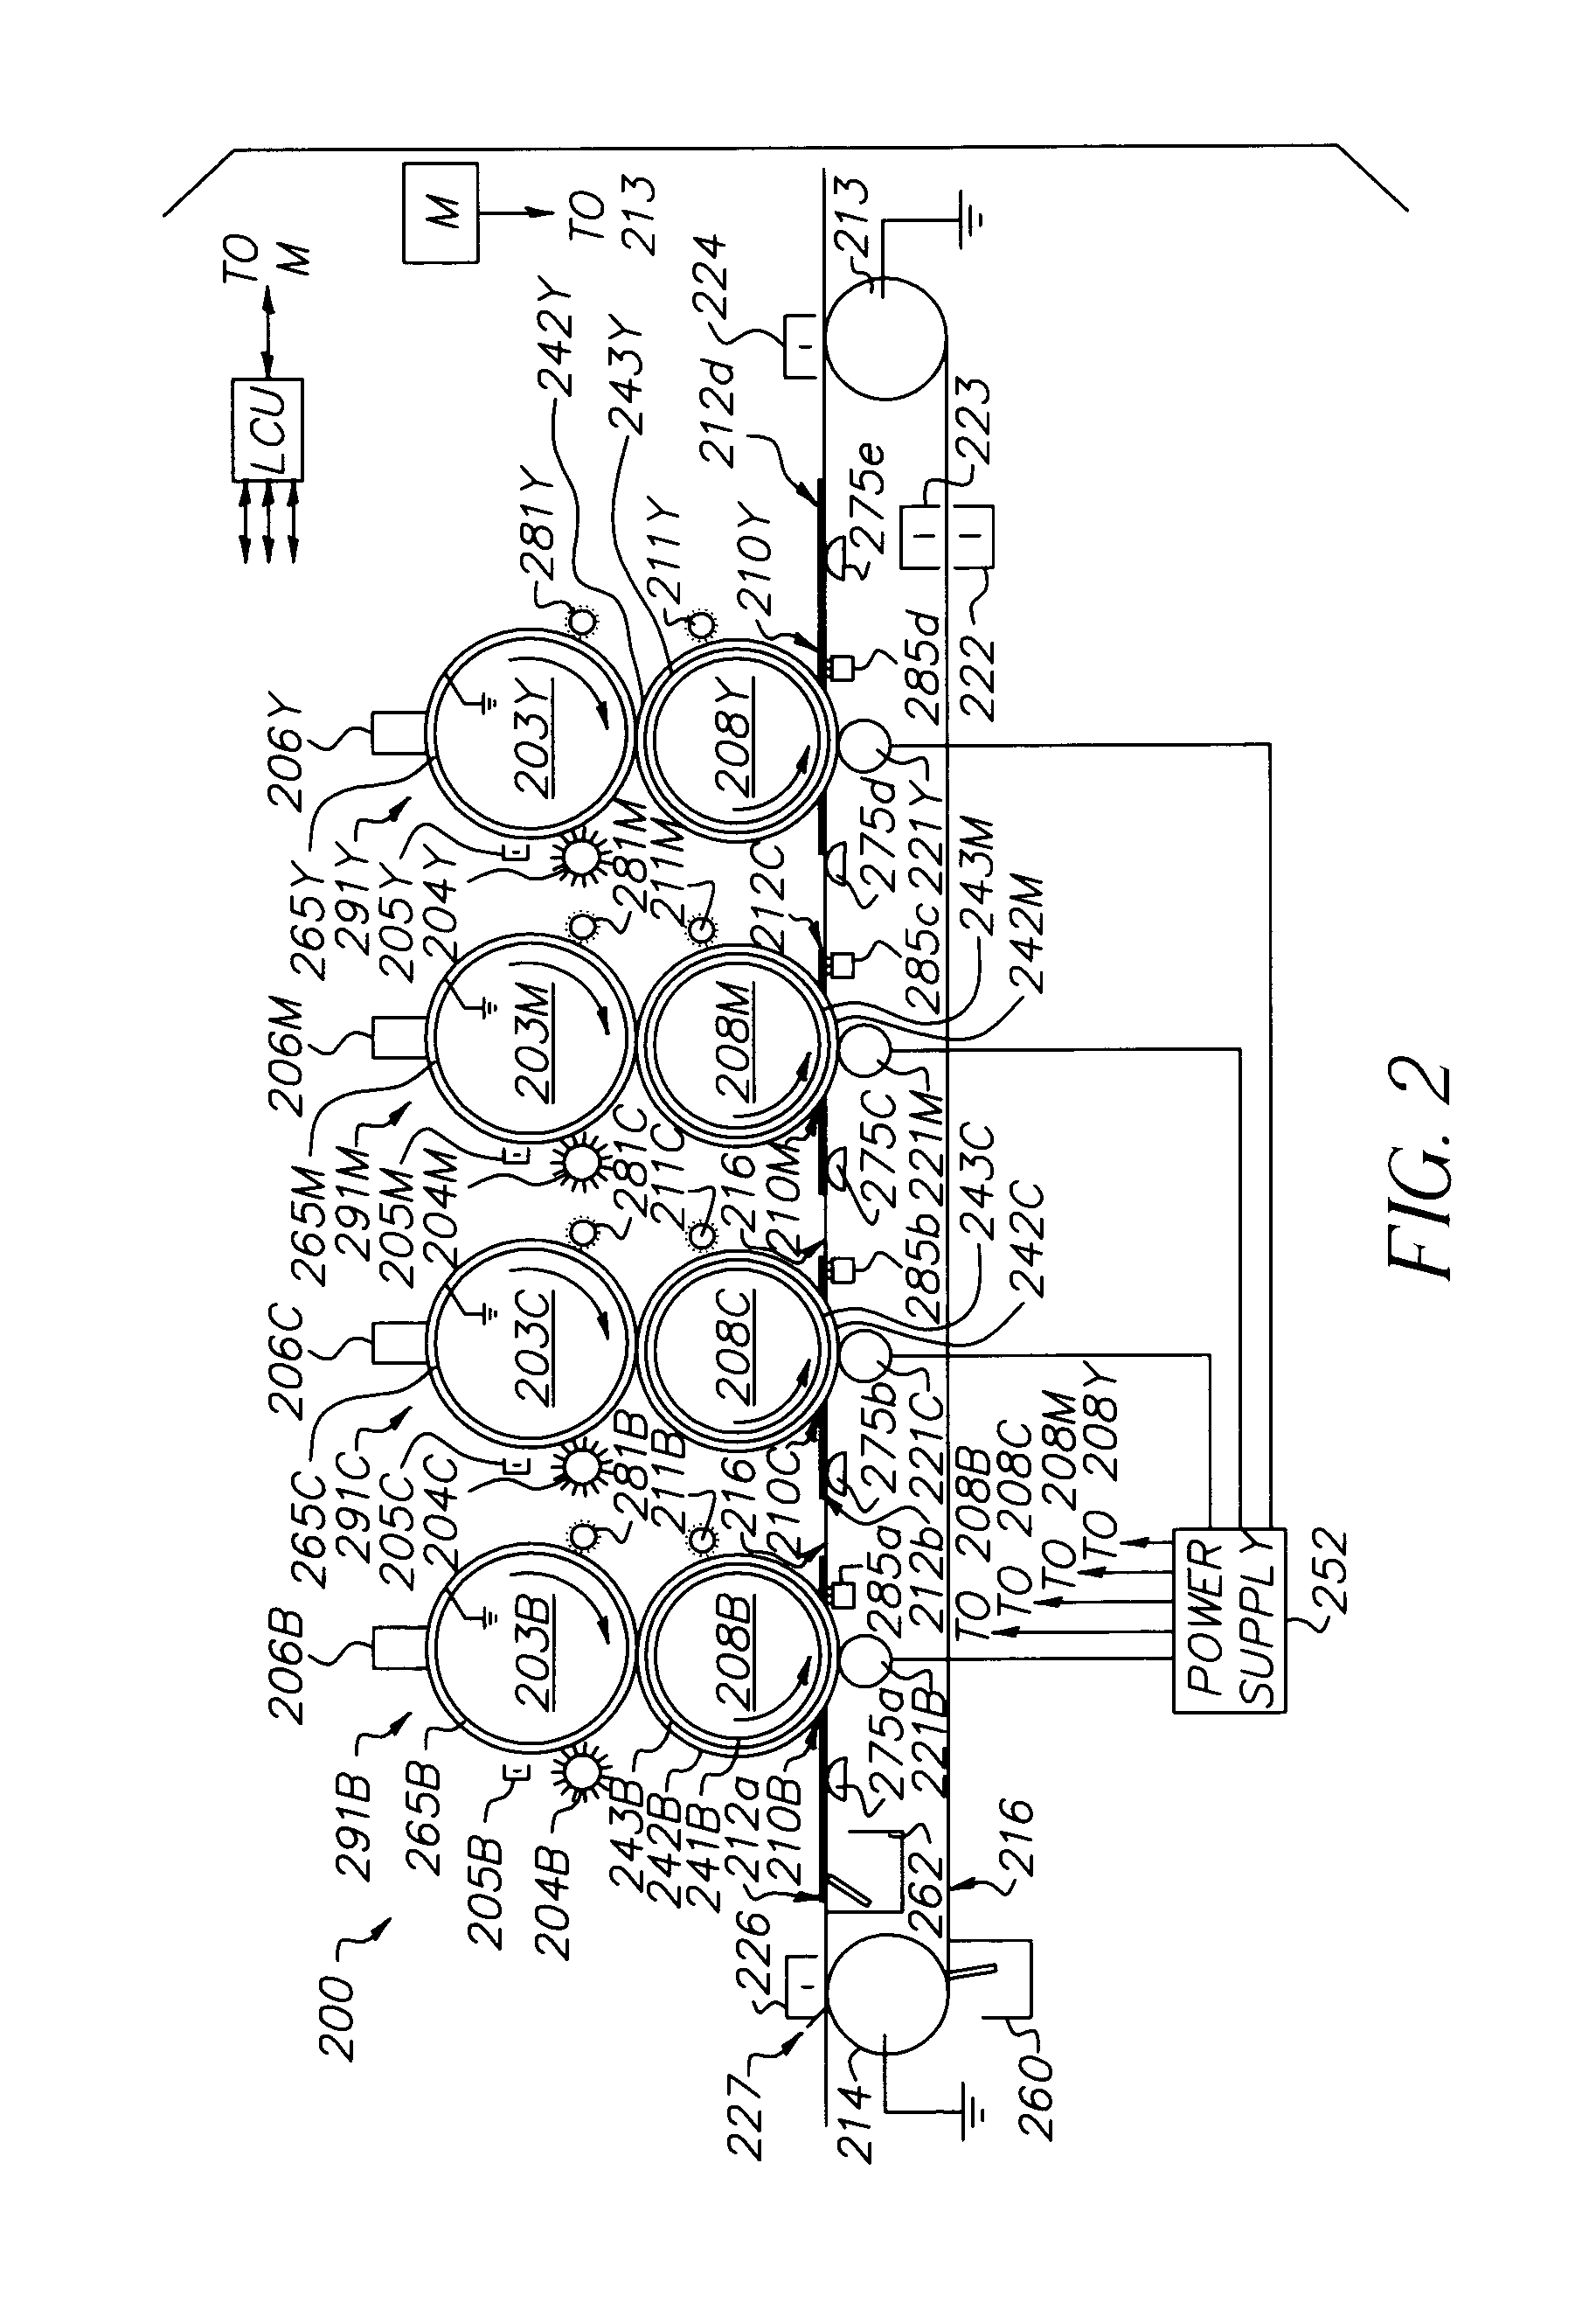 Method and apparatus for reducing supply orders in inventory management